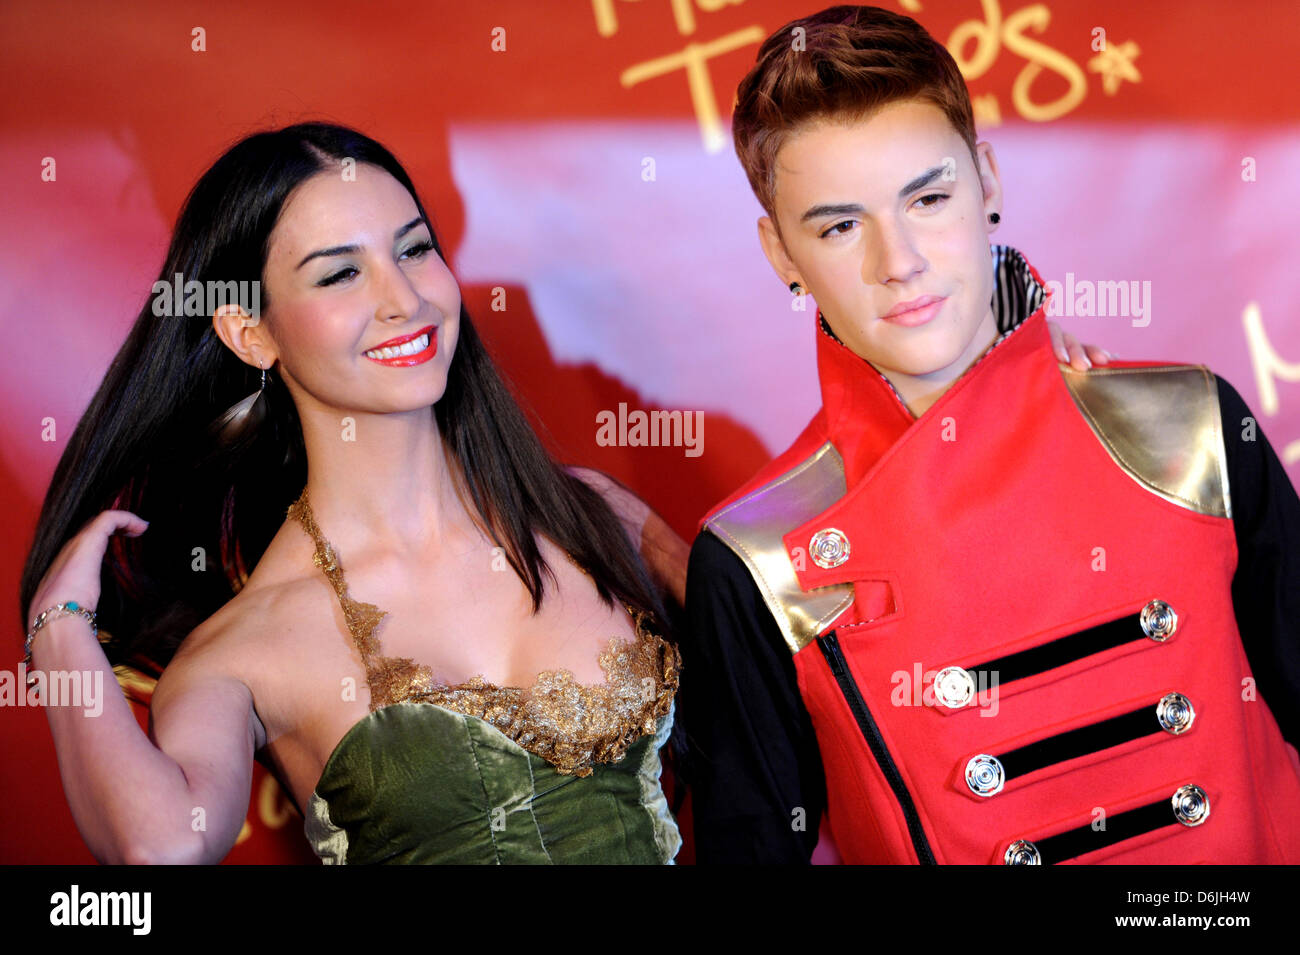 Actress Sila Sahin presents the wax statue of Canadian singer Justin Bieber in Madame Tussauds in Berlin, Germany, 19 March 2012. Photo: RAINER JENSEN Stock Photo